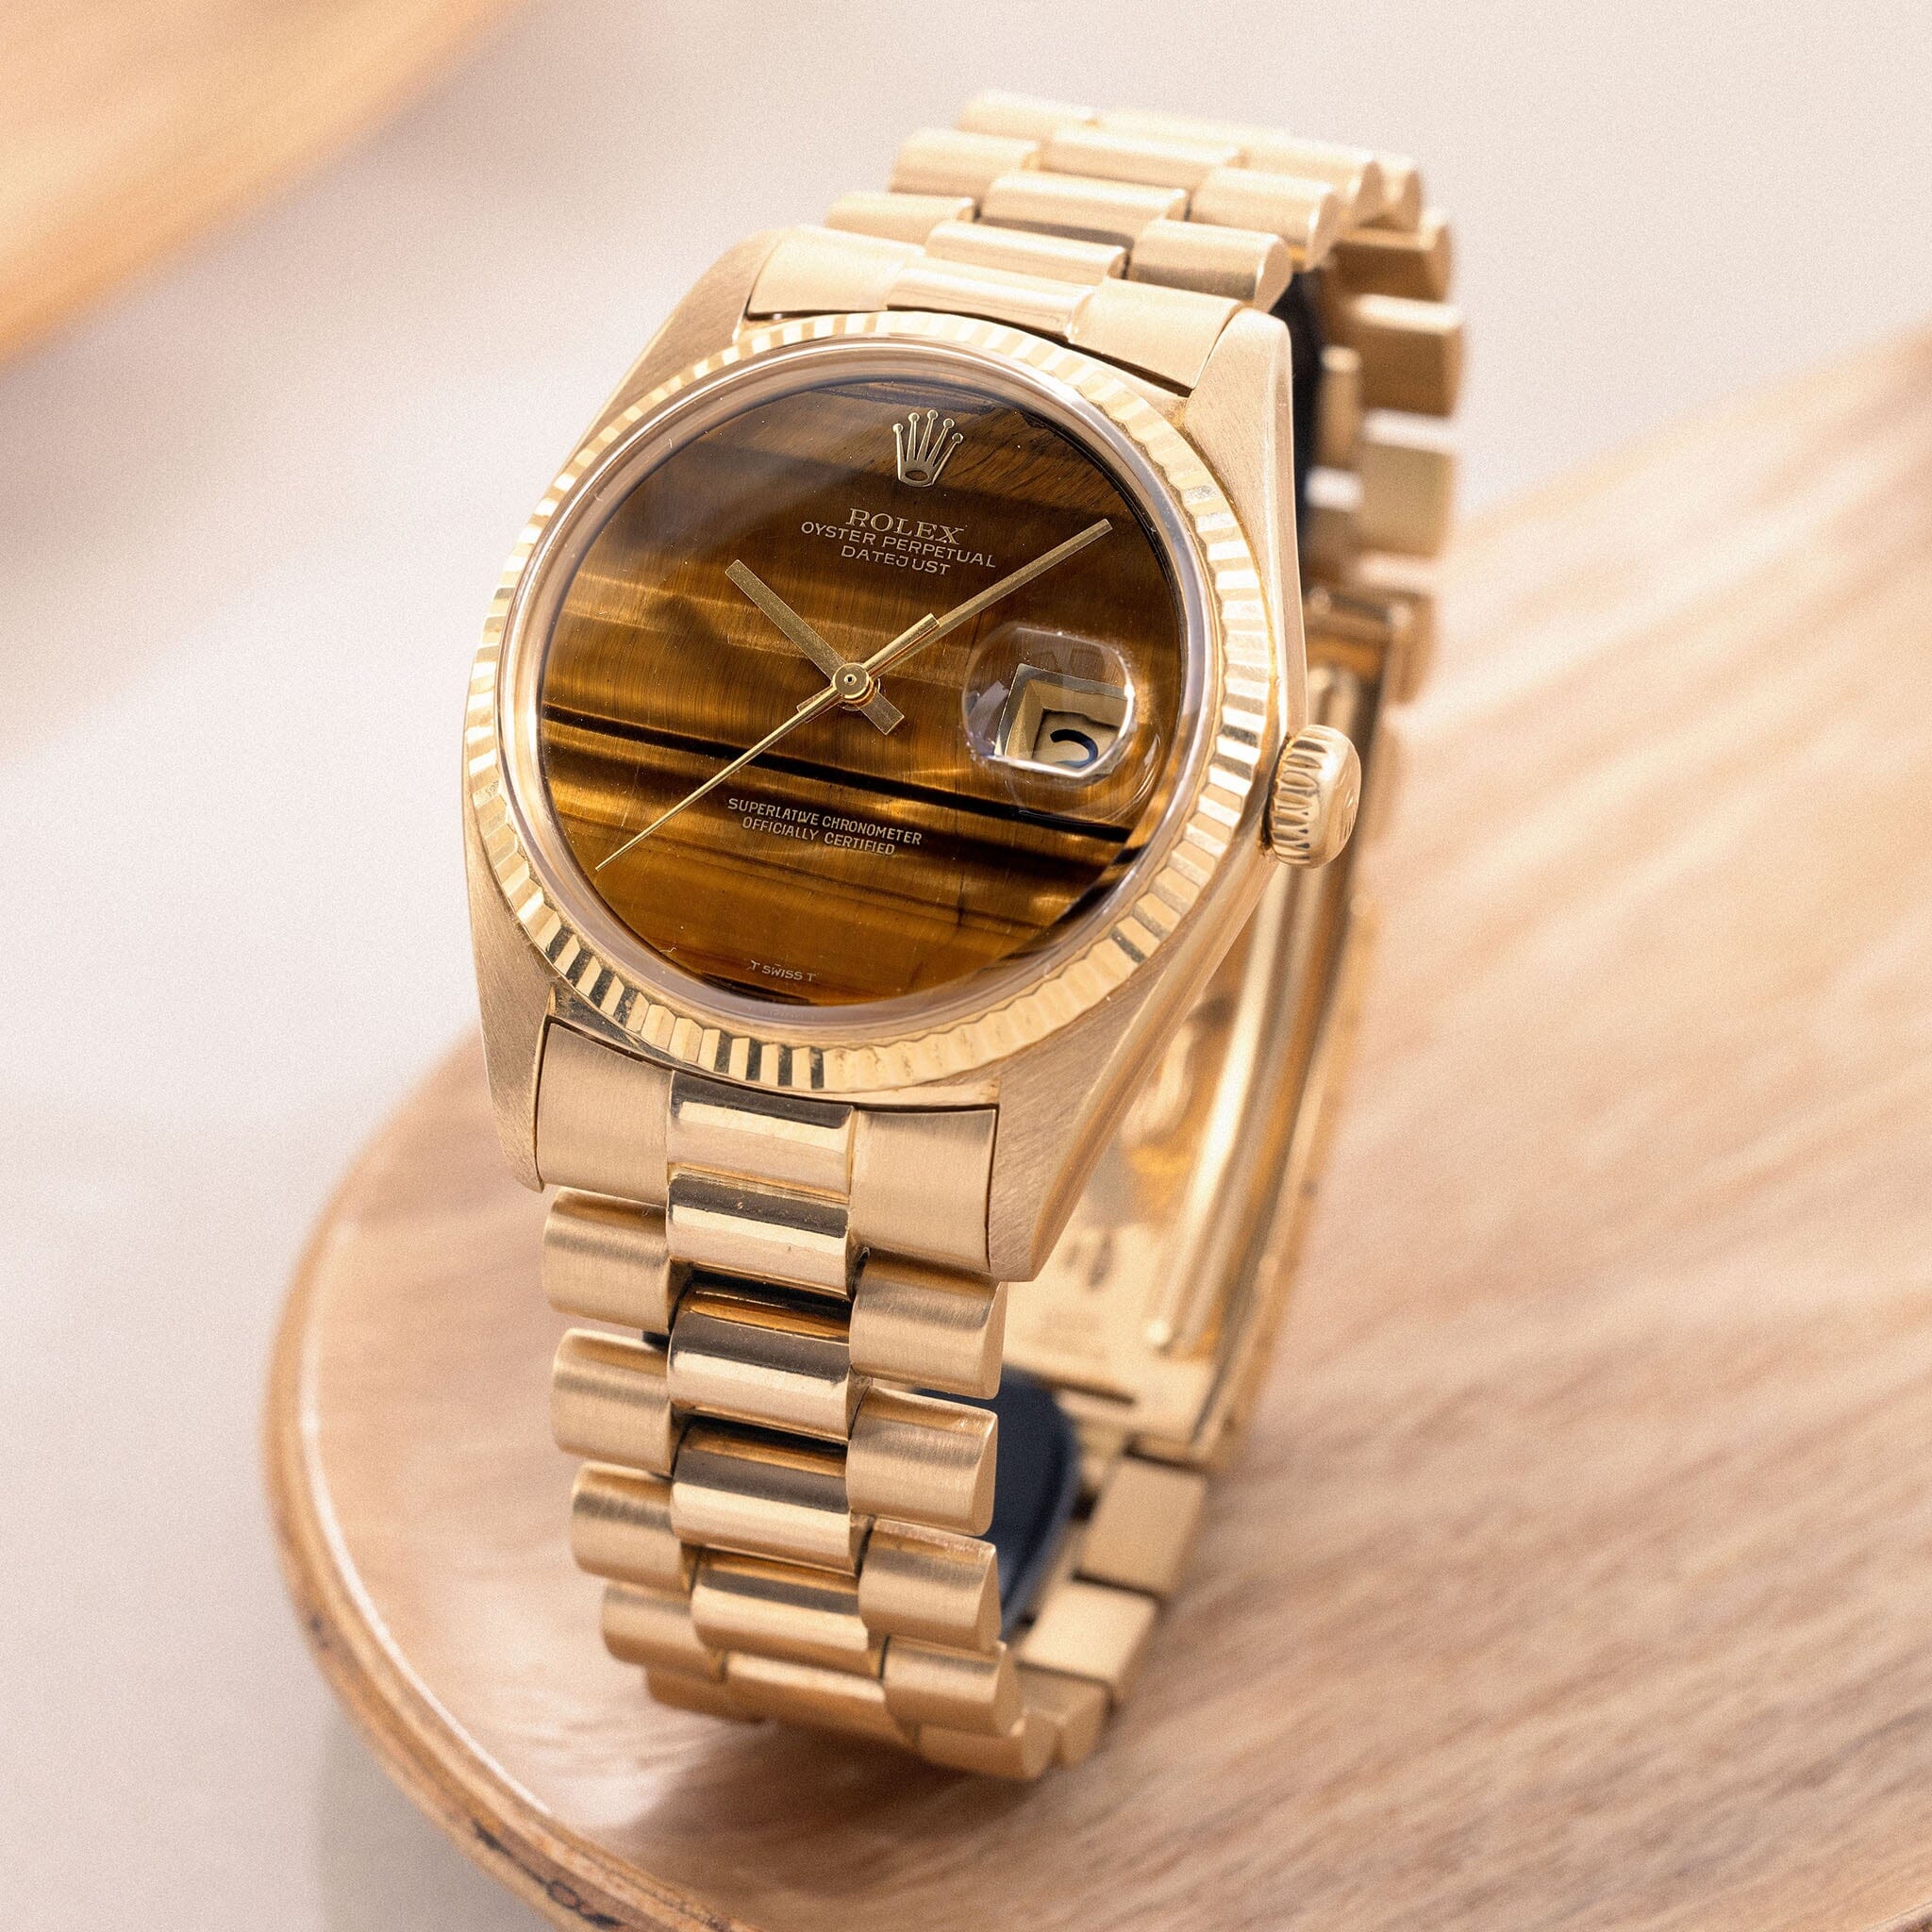 Rolex Datejust Yellow Gold Tiger Eye Stone Dial ref 1601